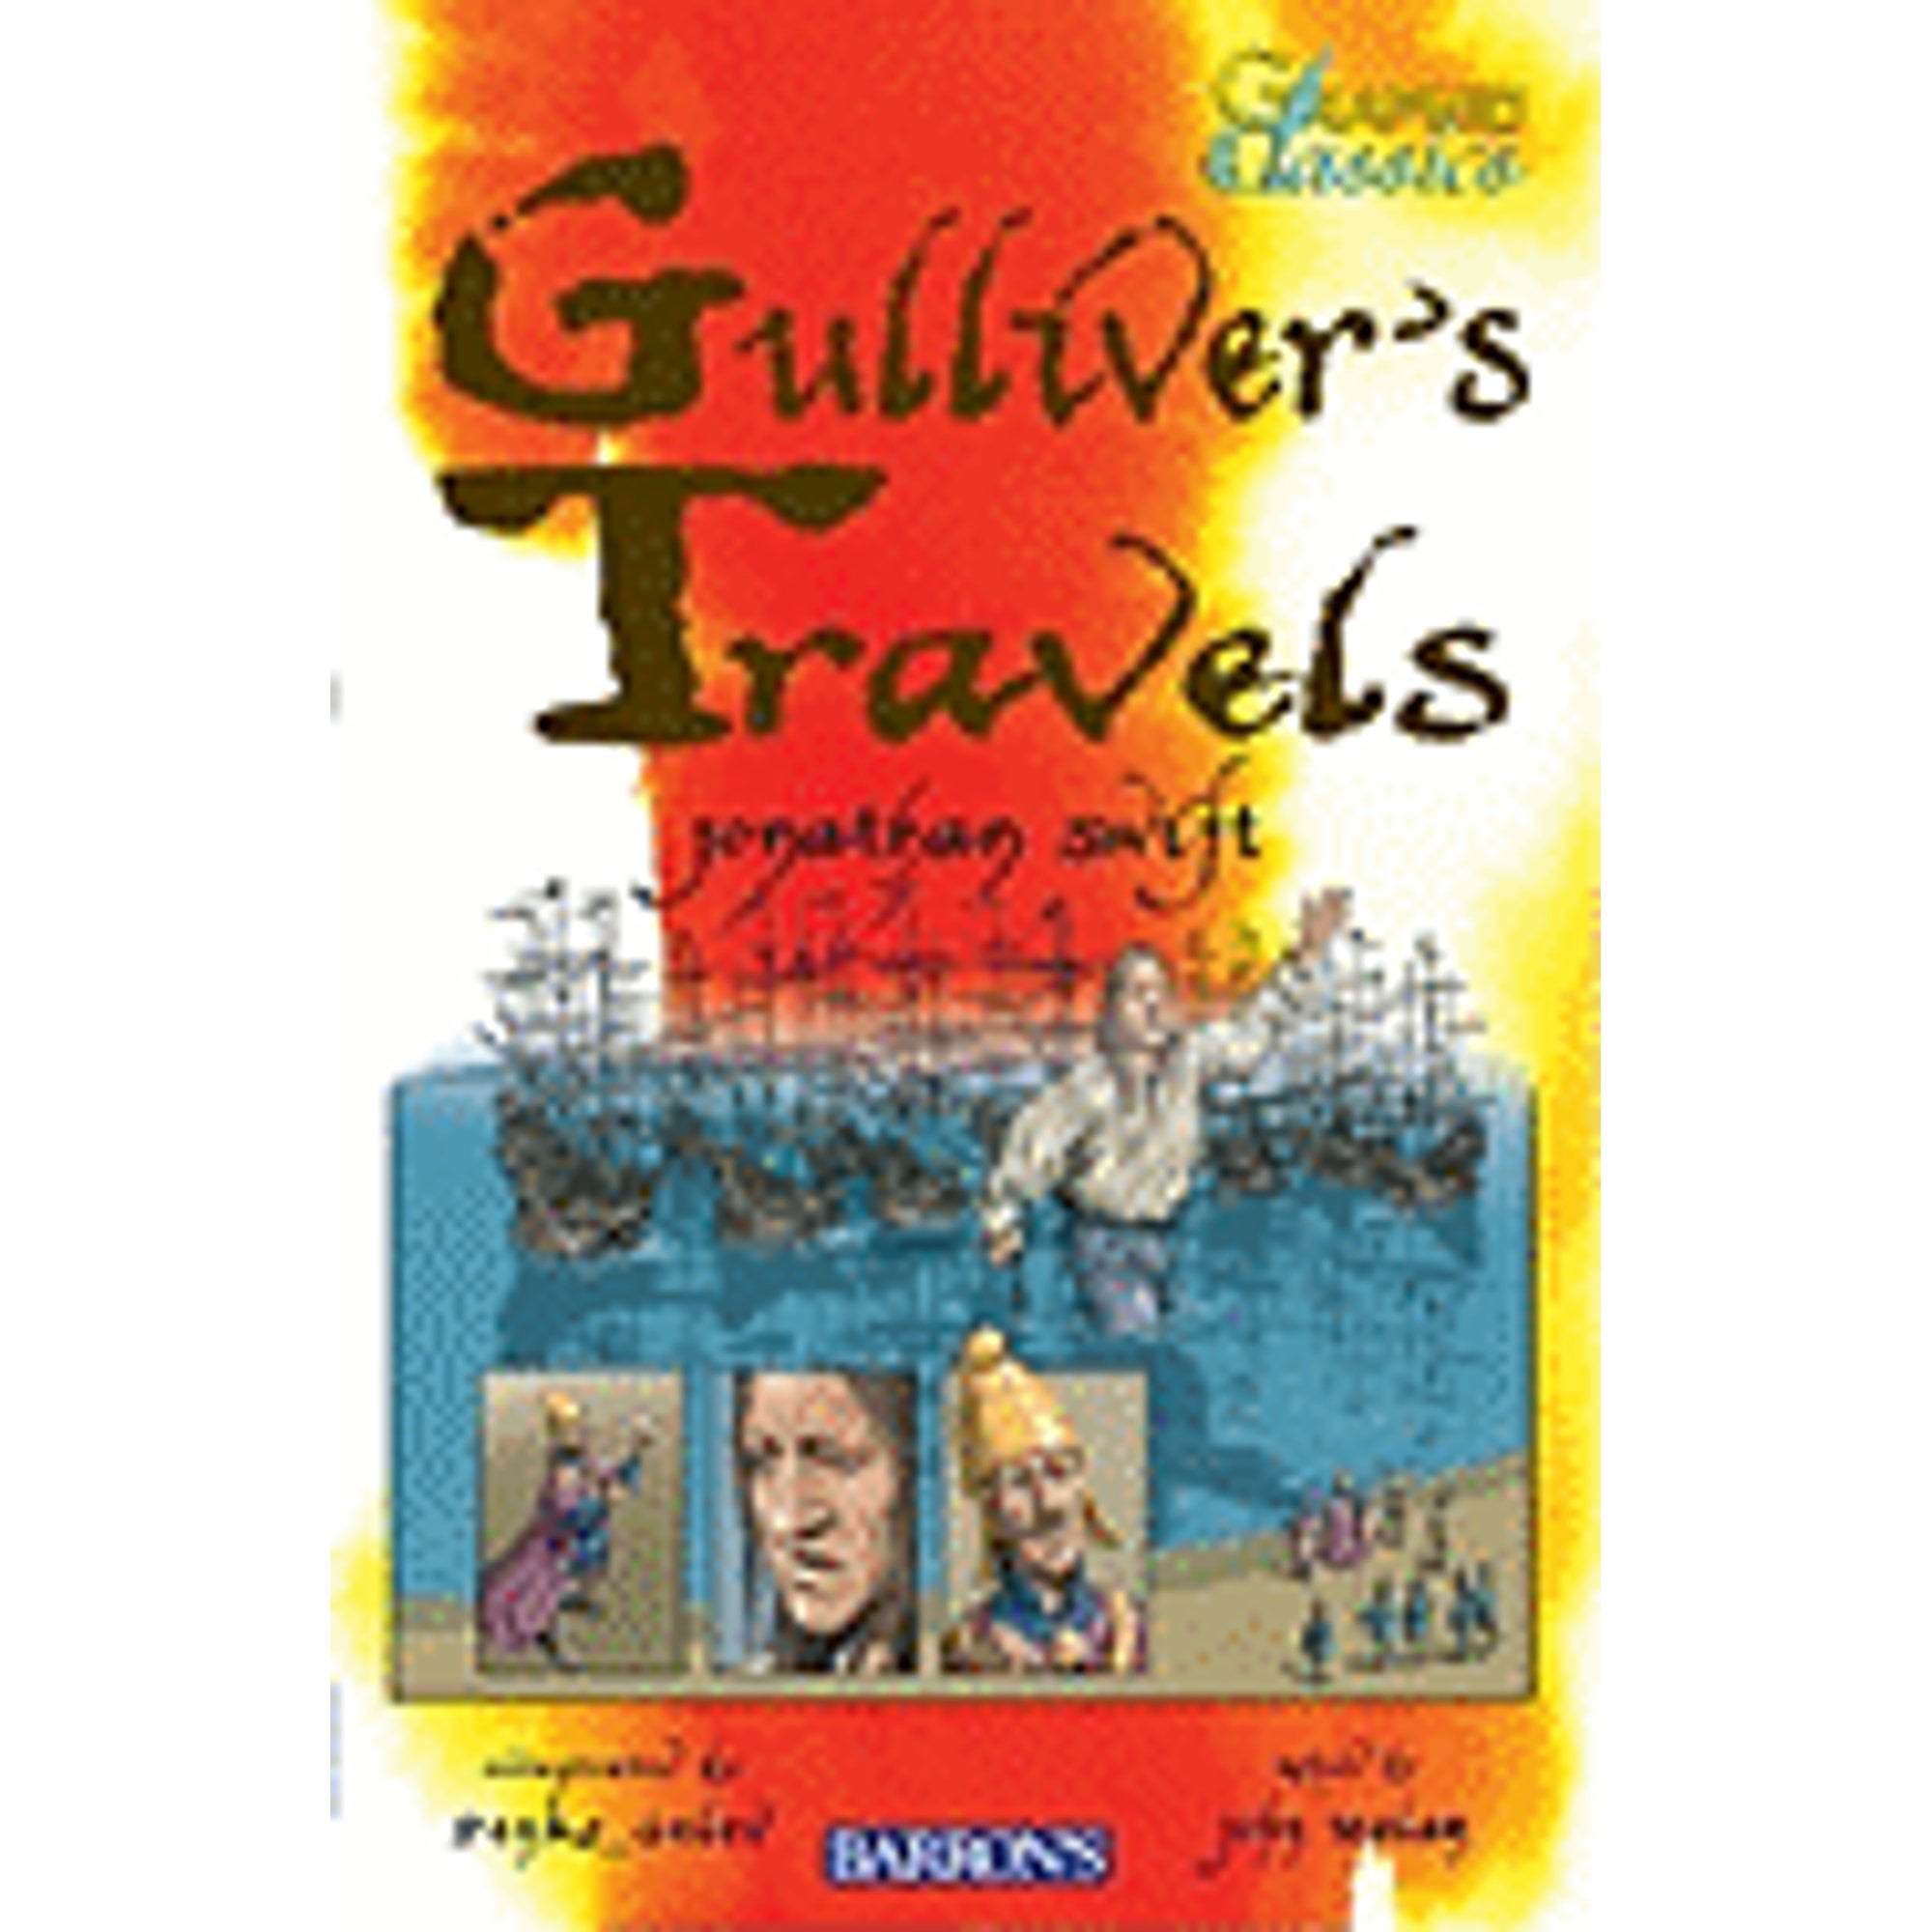 Pre-Owned Gulliver's Travels (Paperback 9780764142802) by John Malam, Penko Gelev, Jonathan Swift